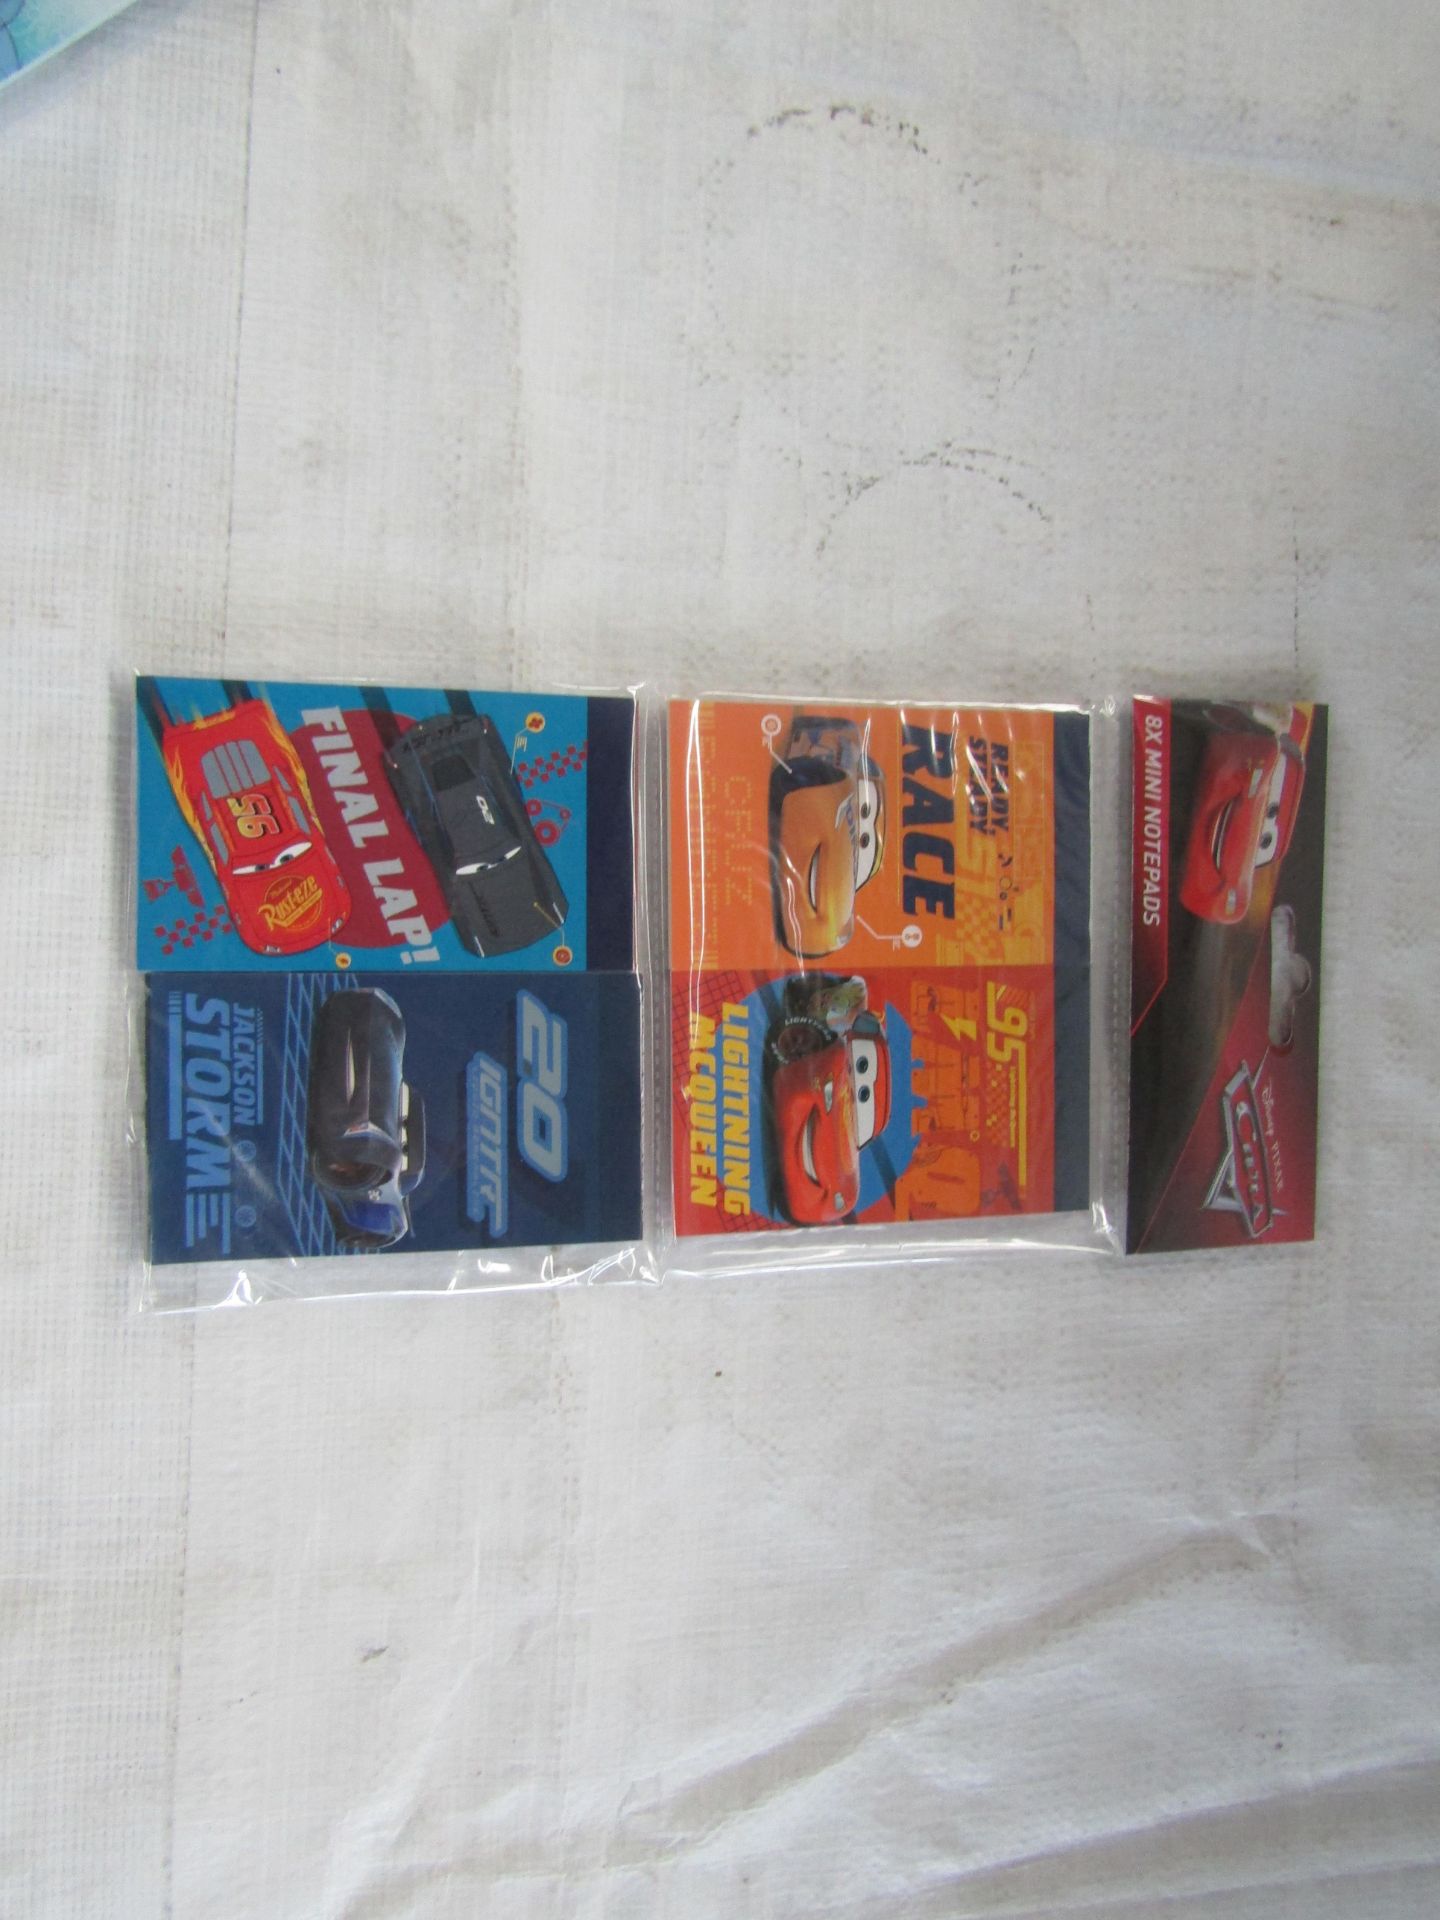 72X Disney Cars - Sets of 8 Mini Notepads - Unused & Packaged.